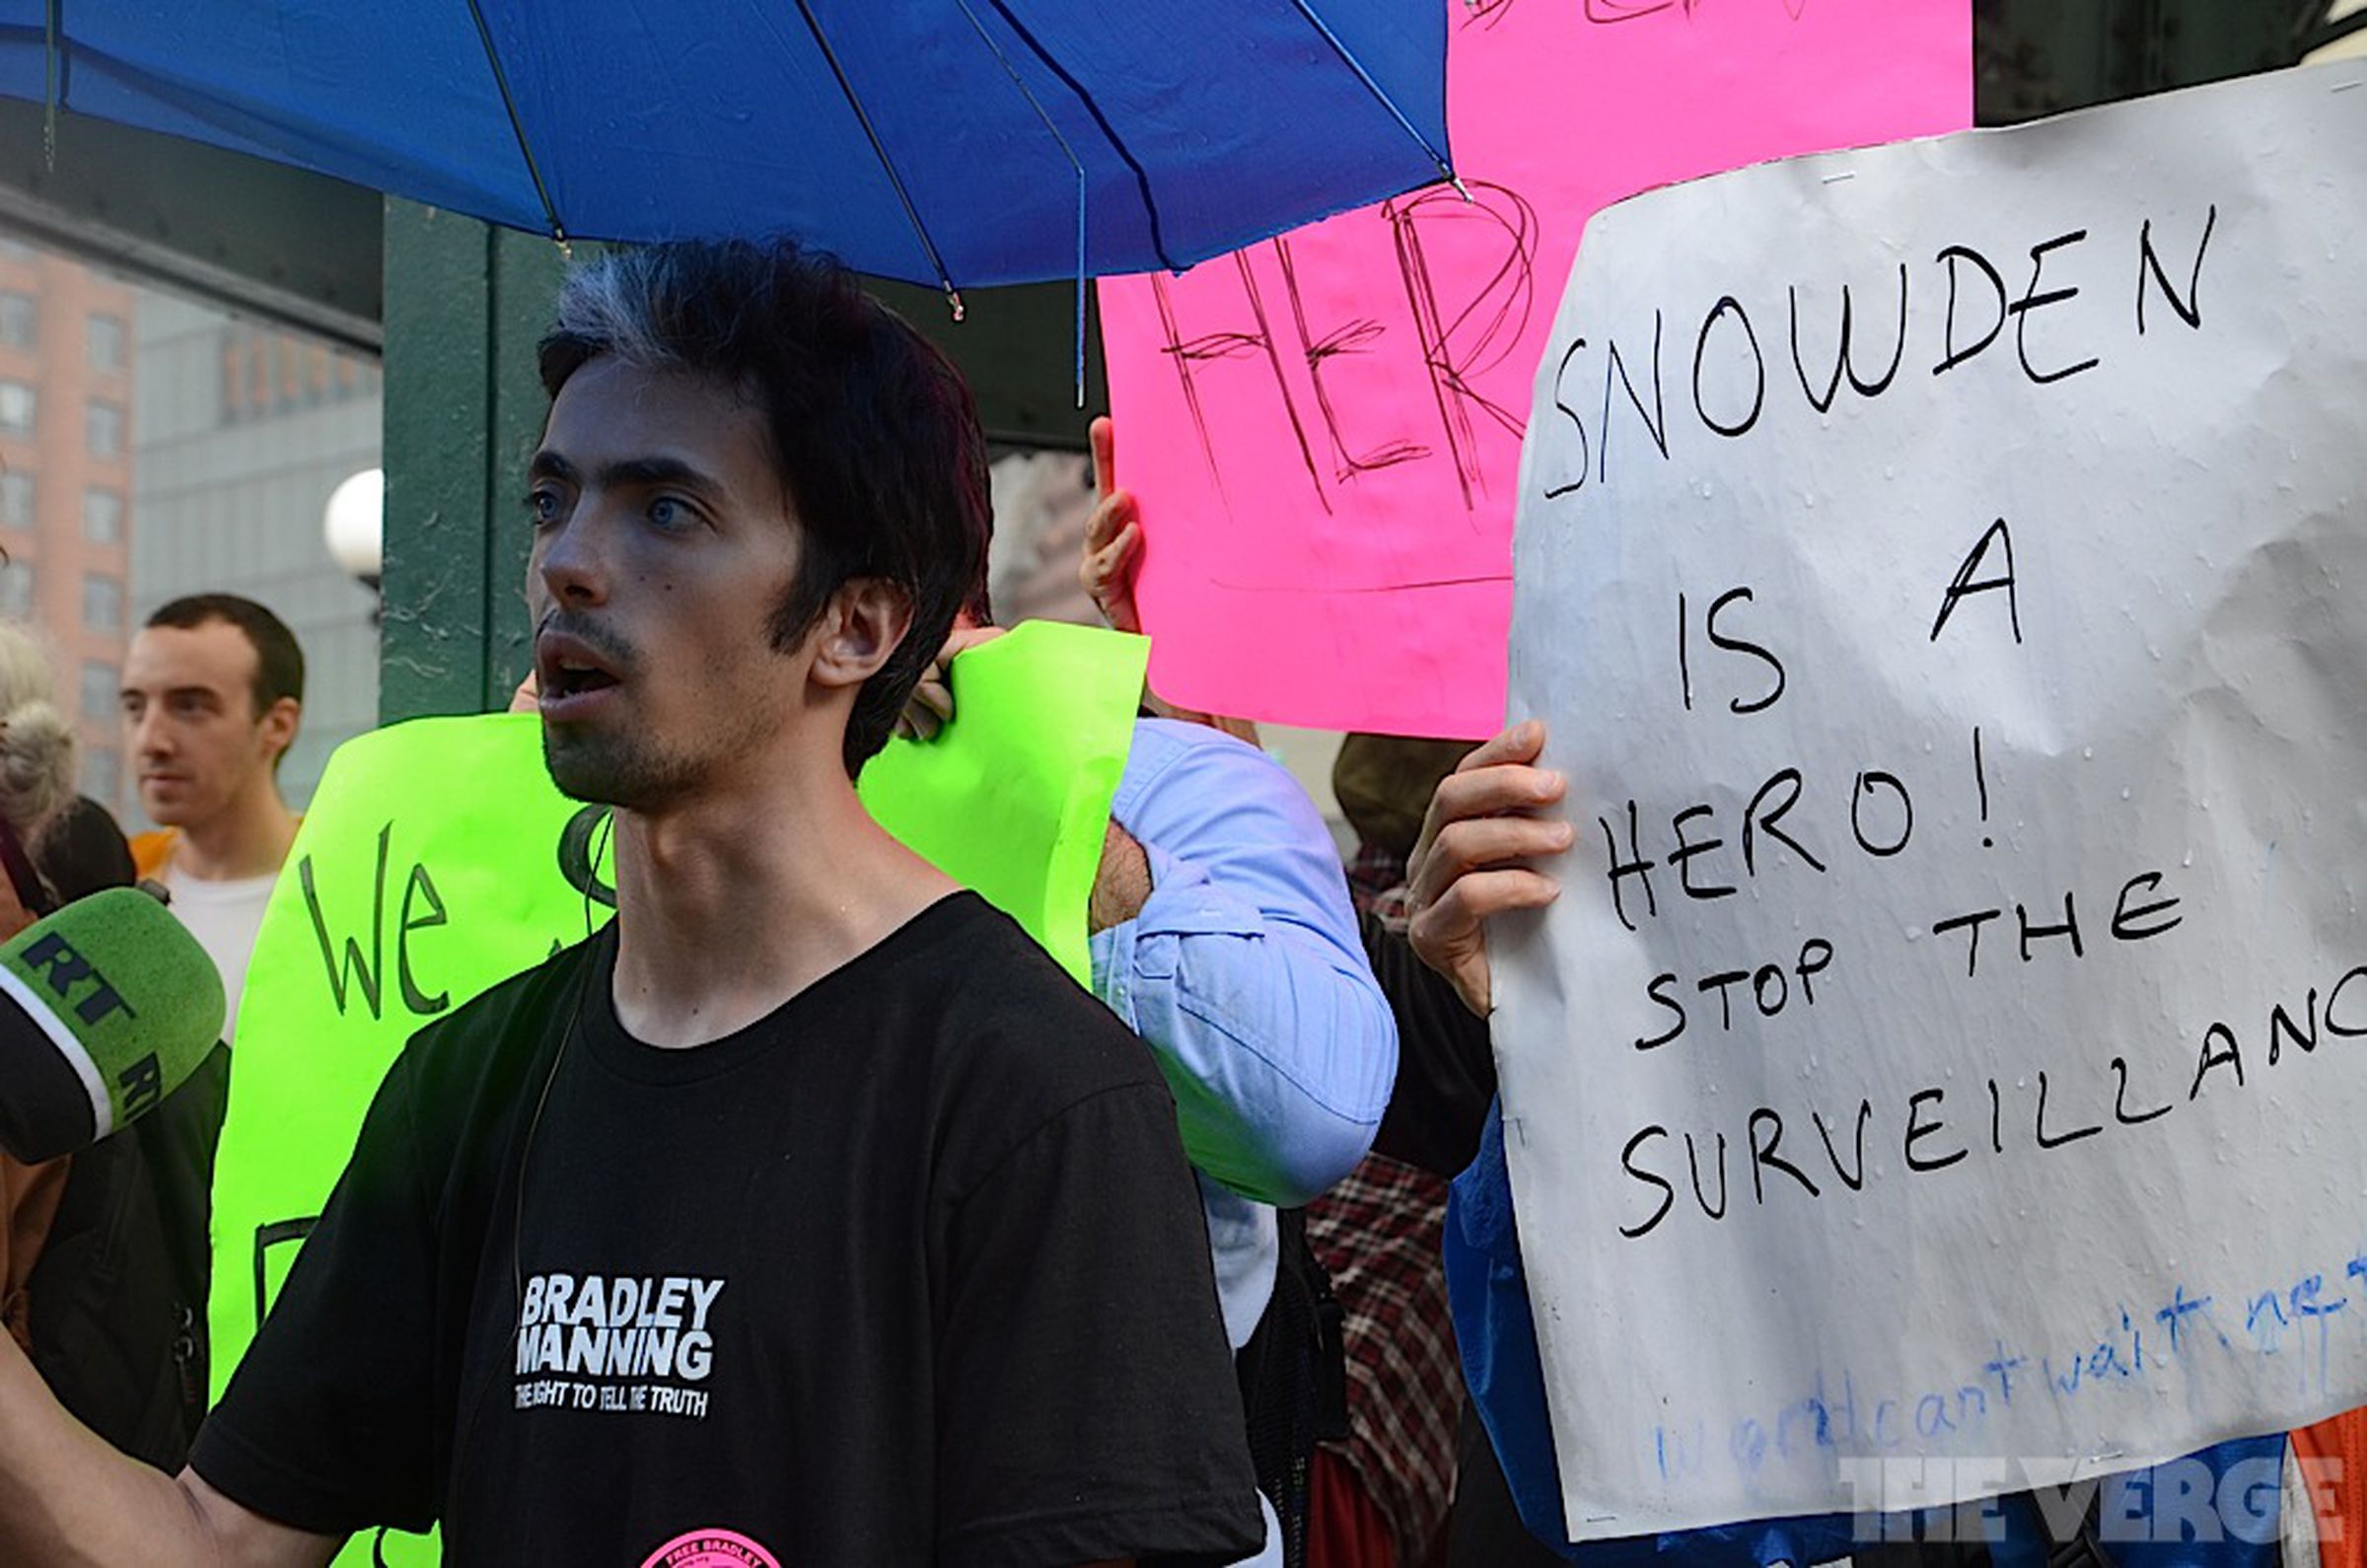 New Yorkers rally for Edward Snowden, NSA whistleblower